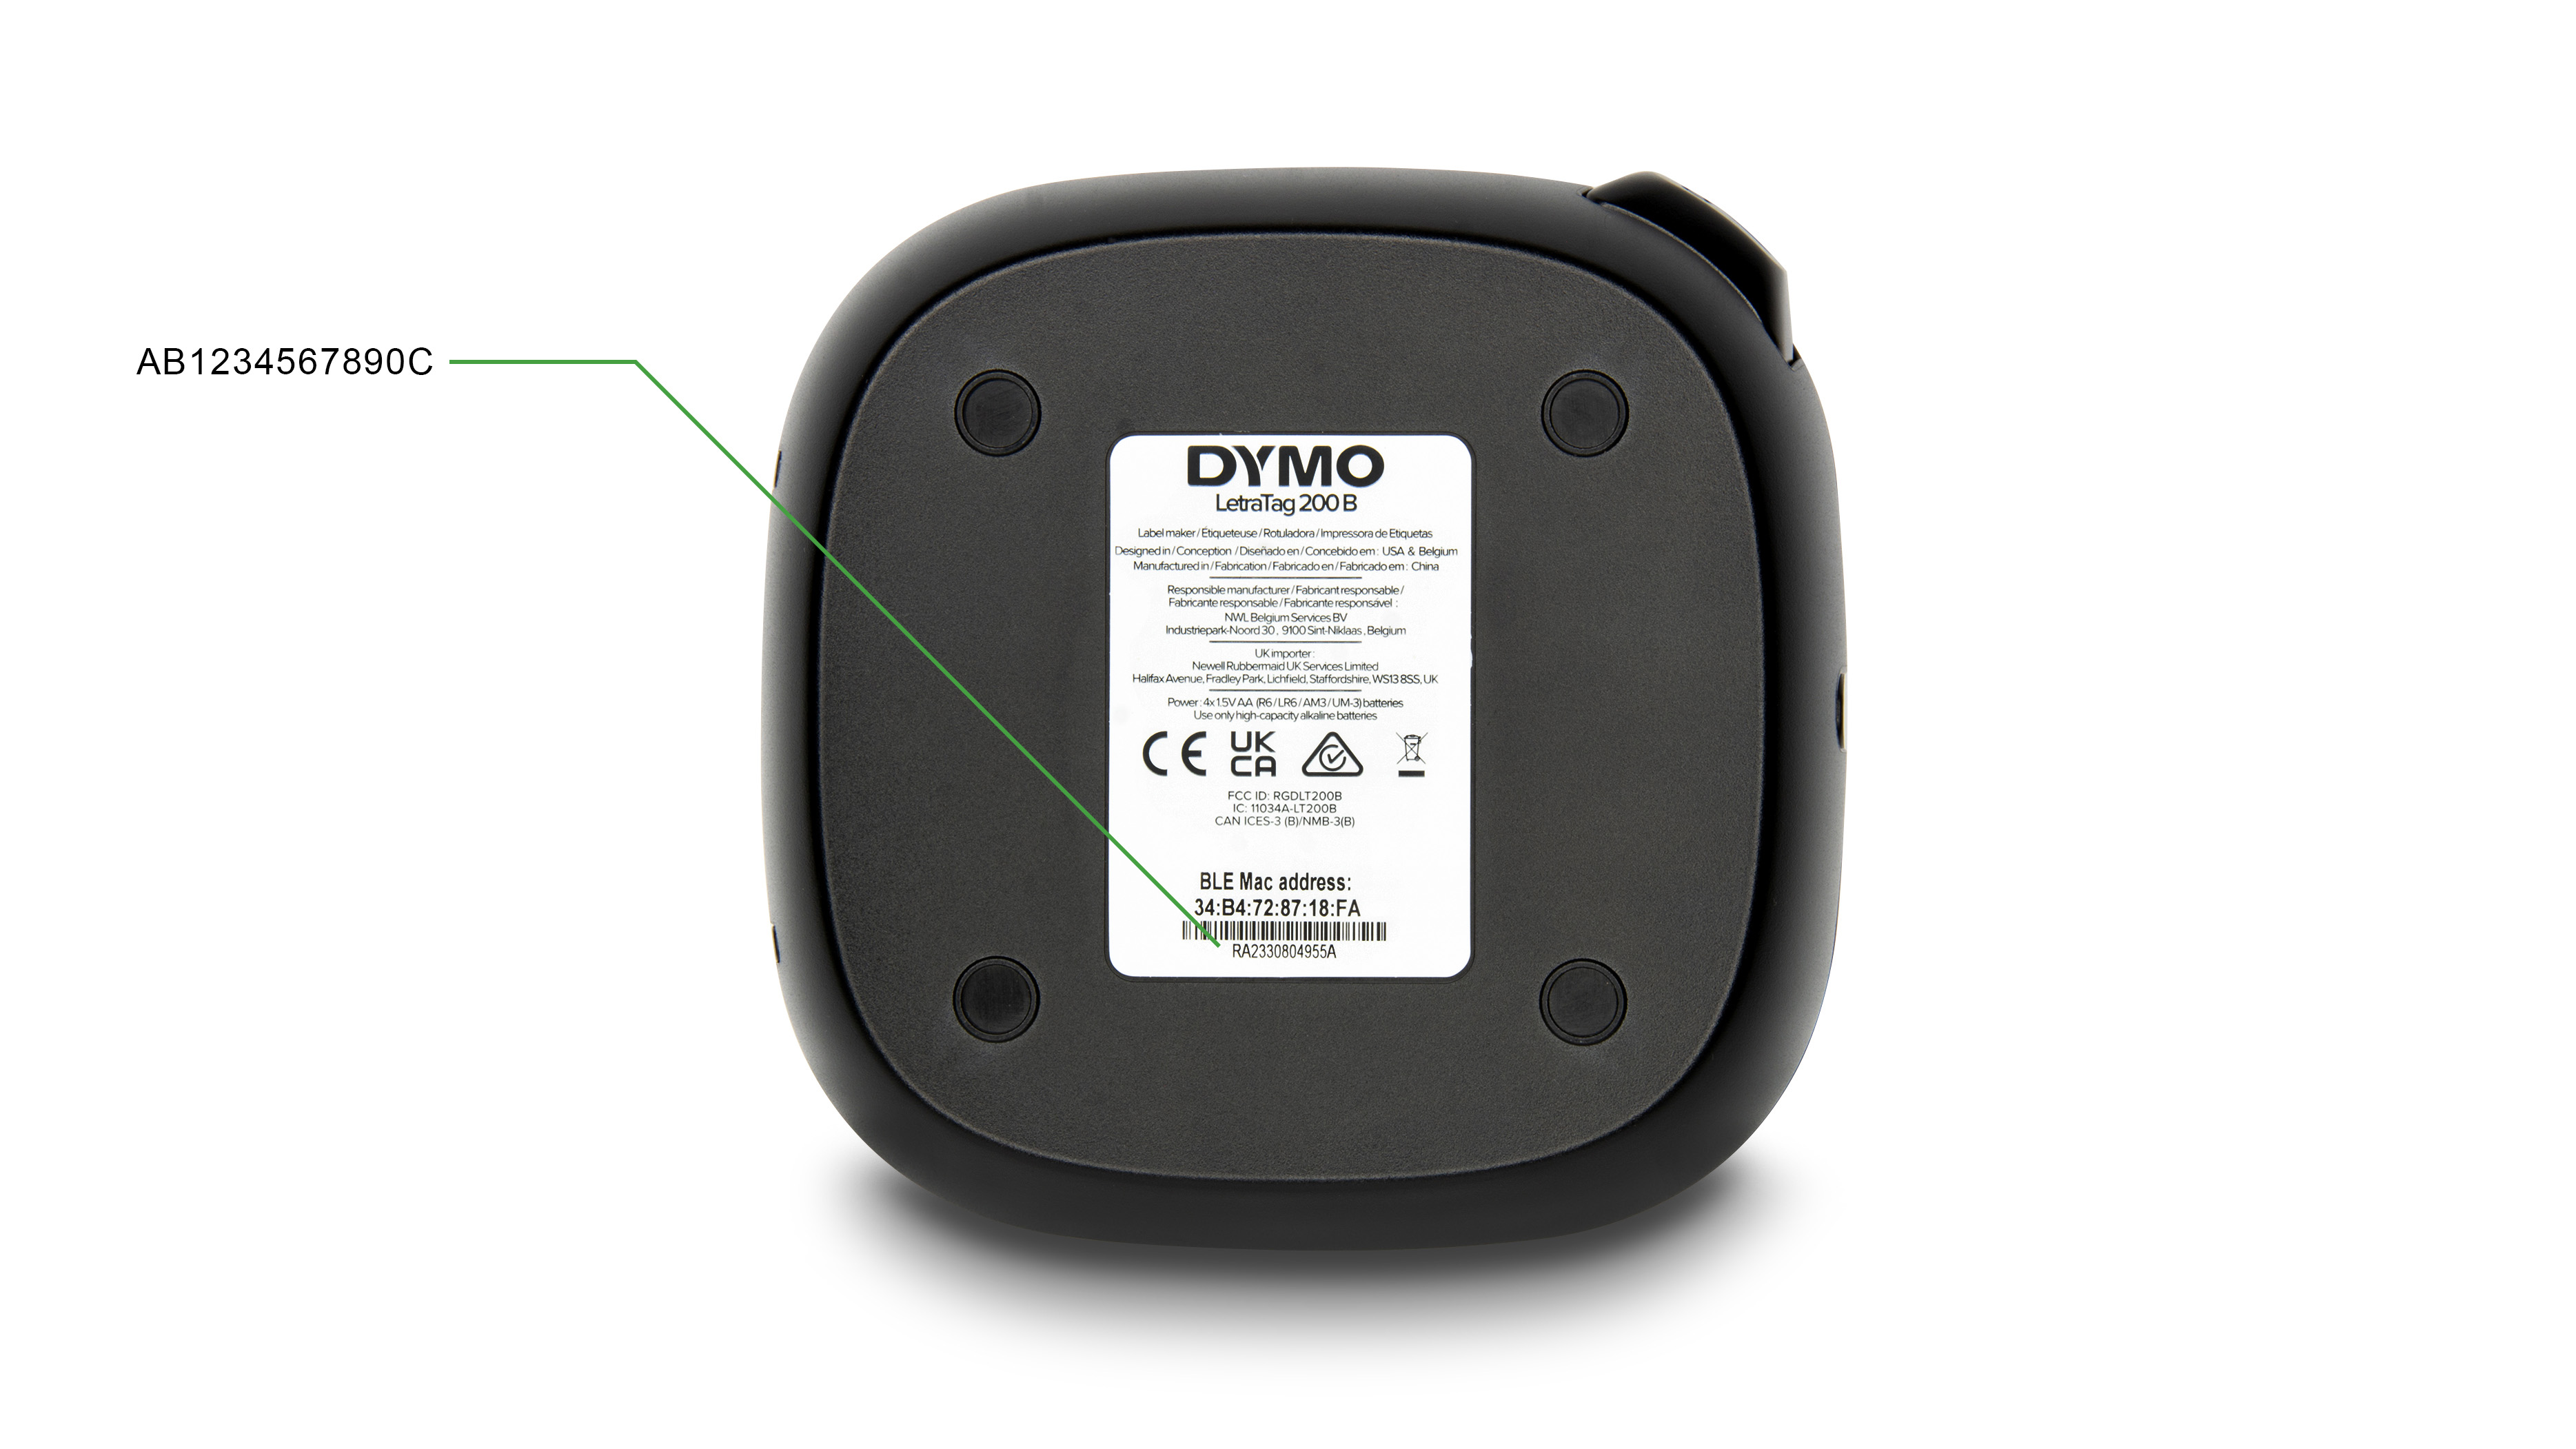 How to find the Serial Number of my DYMO device?